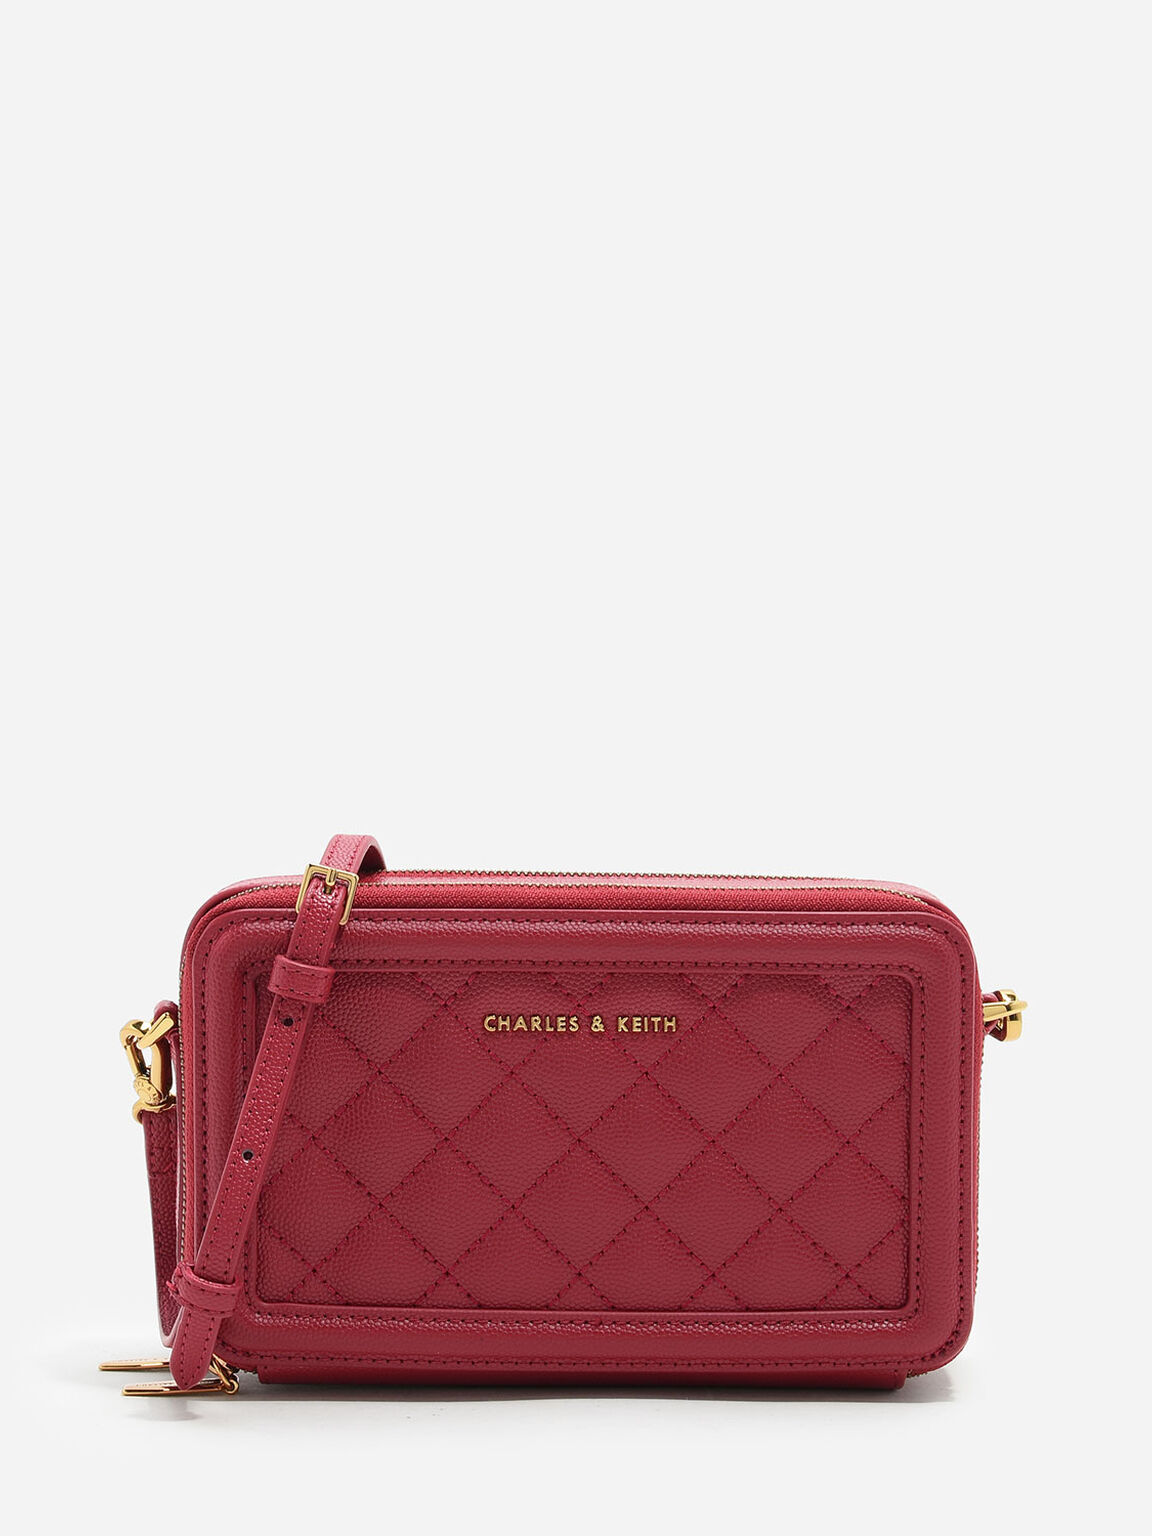 Quilted Boxy Long Wallet, Red, hi-res